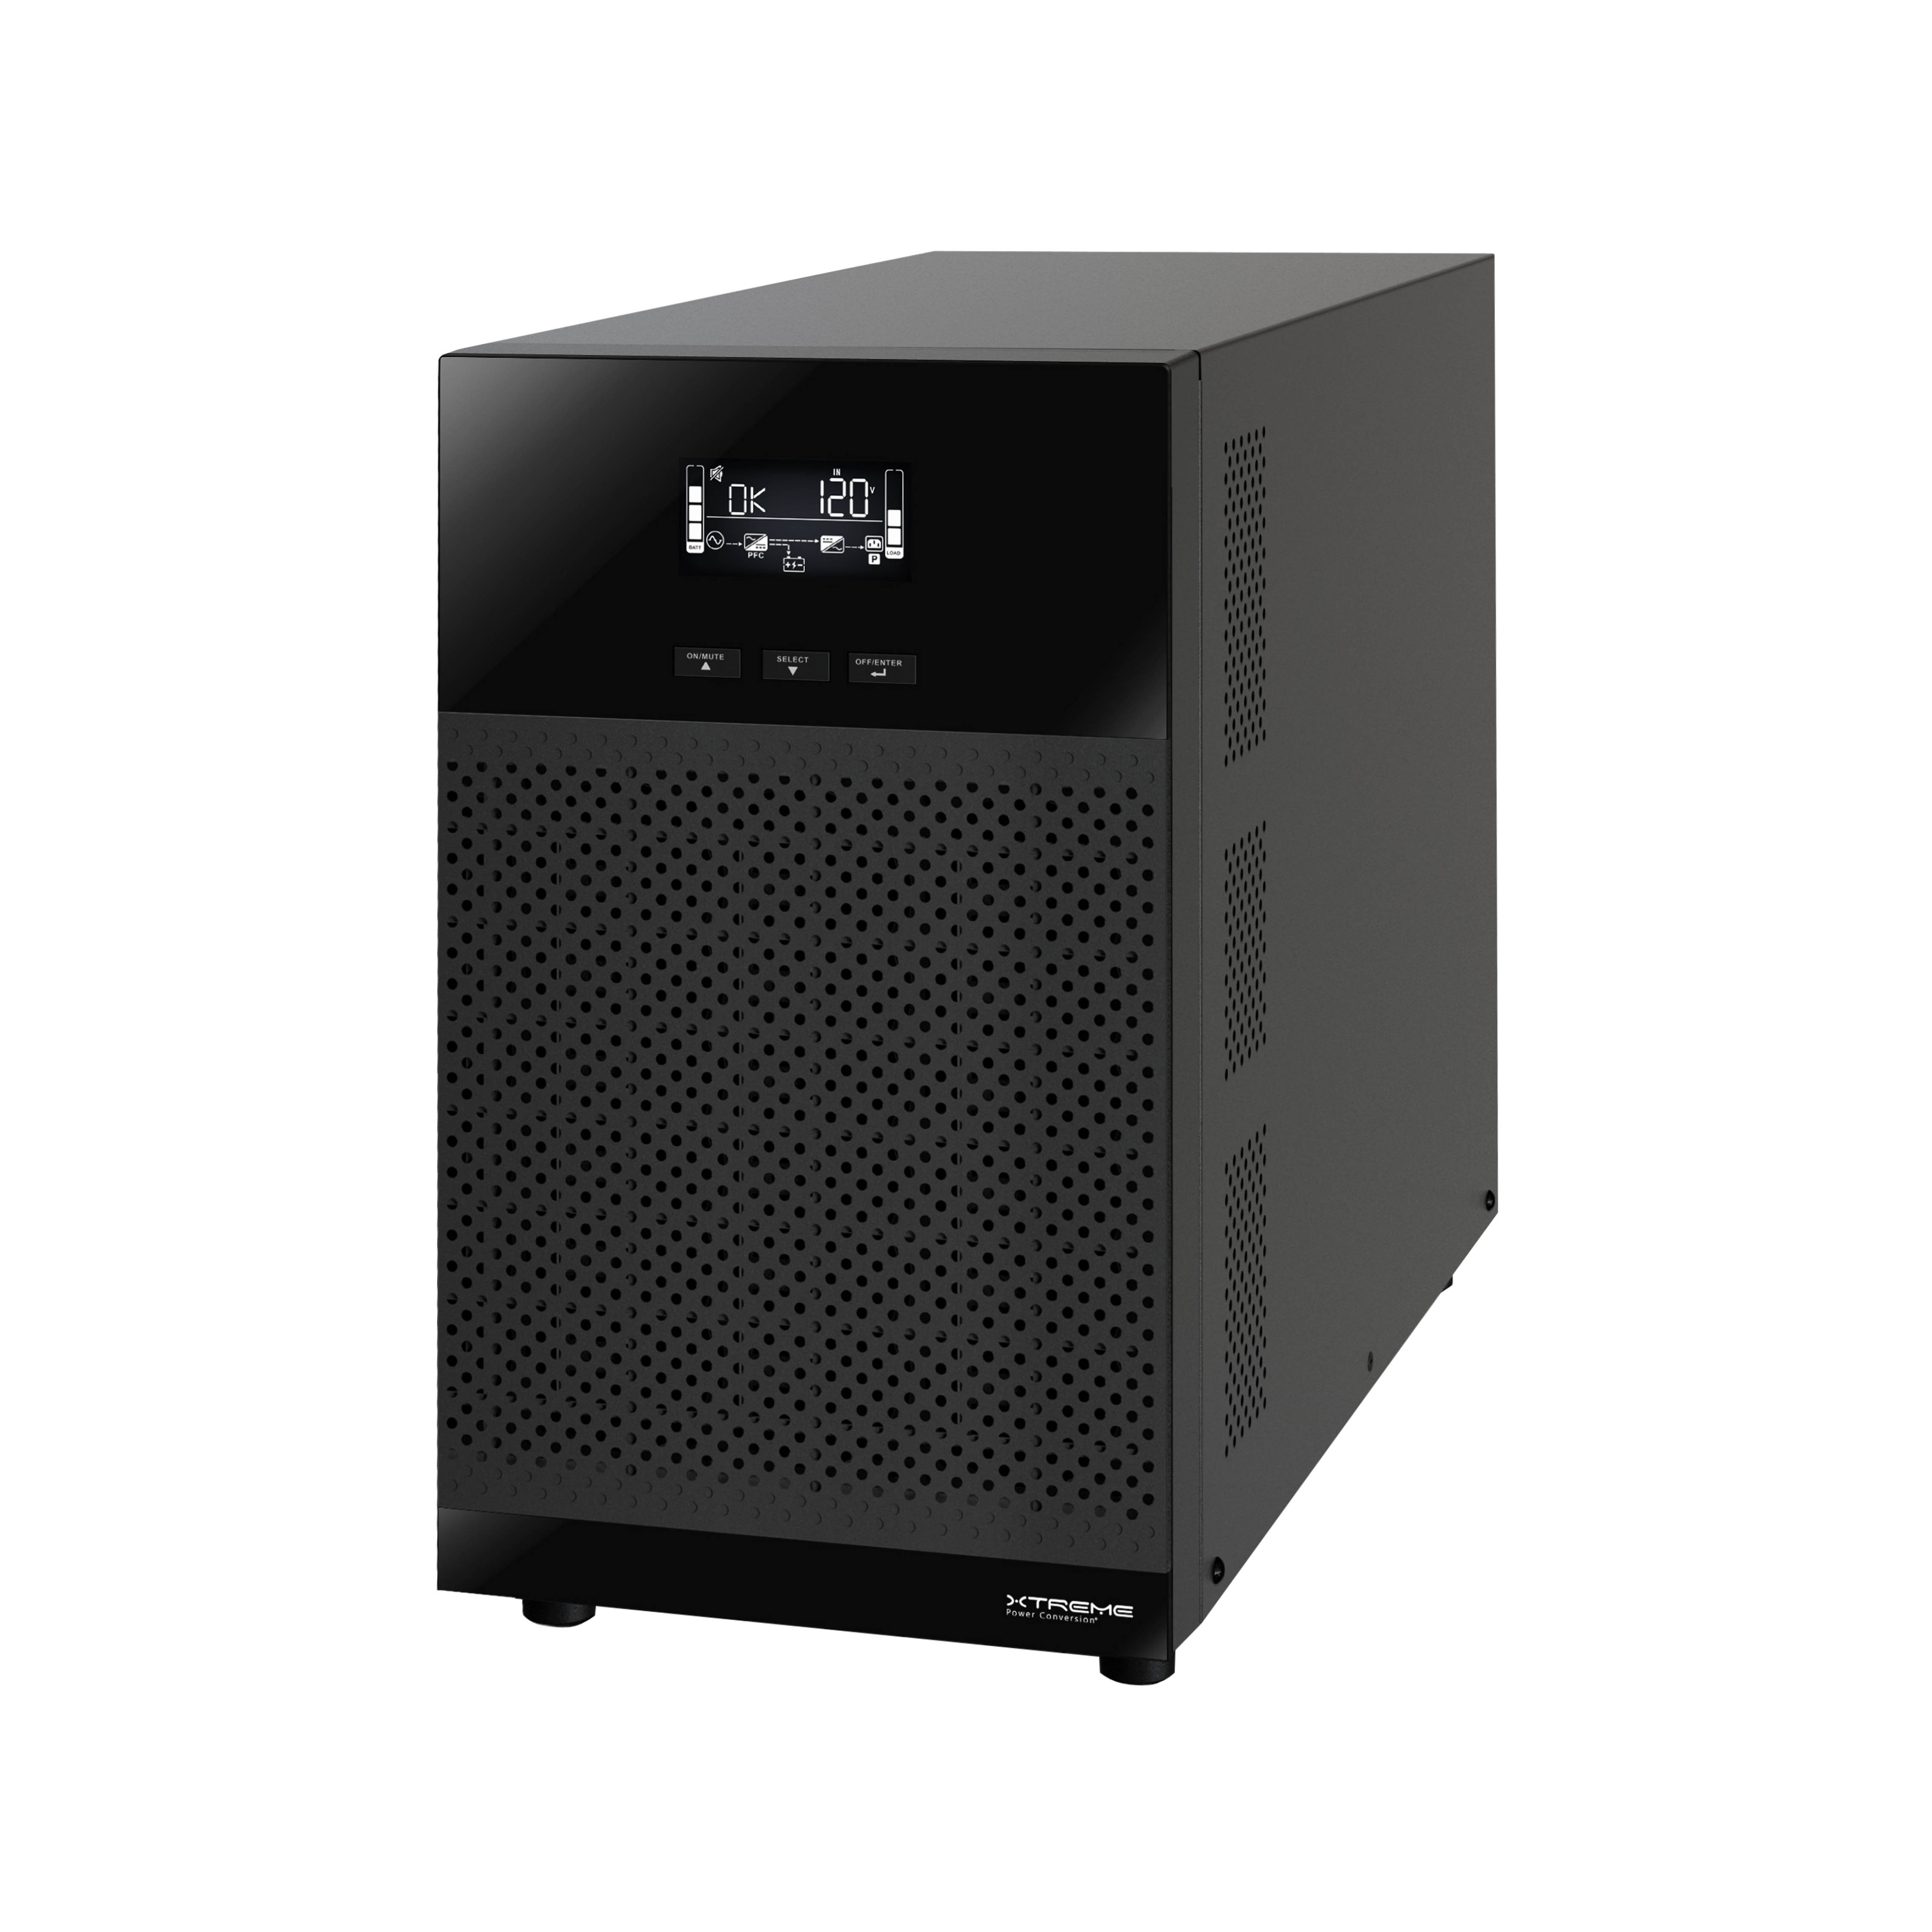 1kva Tower Online UPS (1000W) 120V Input Double Conversion